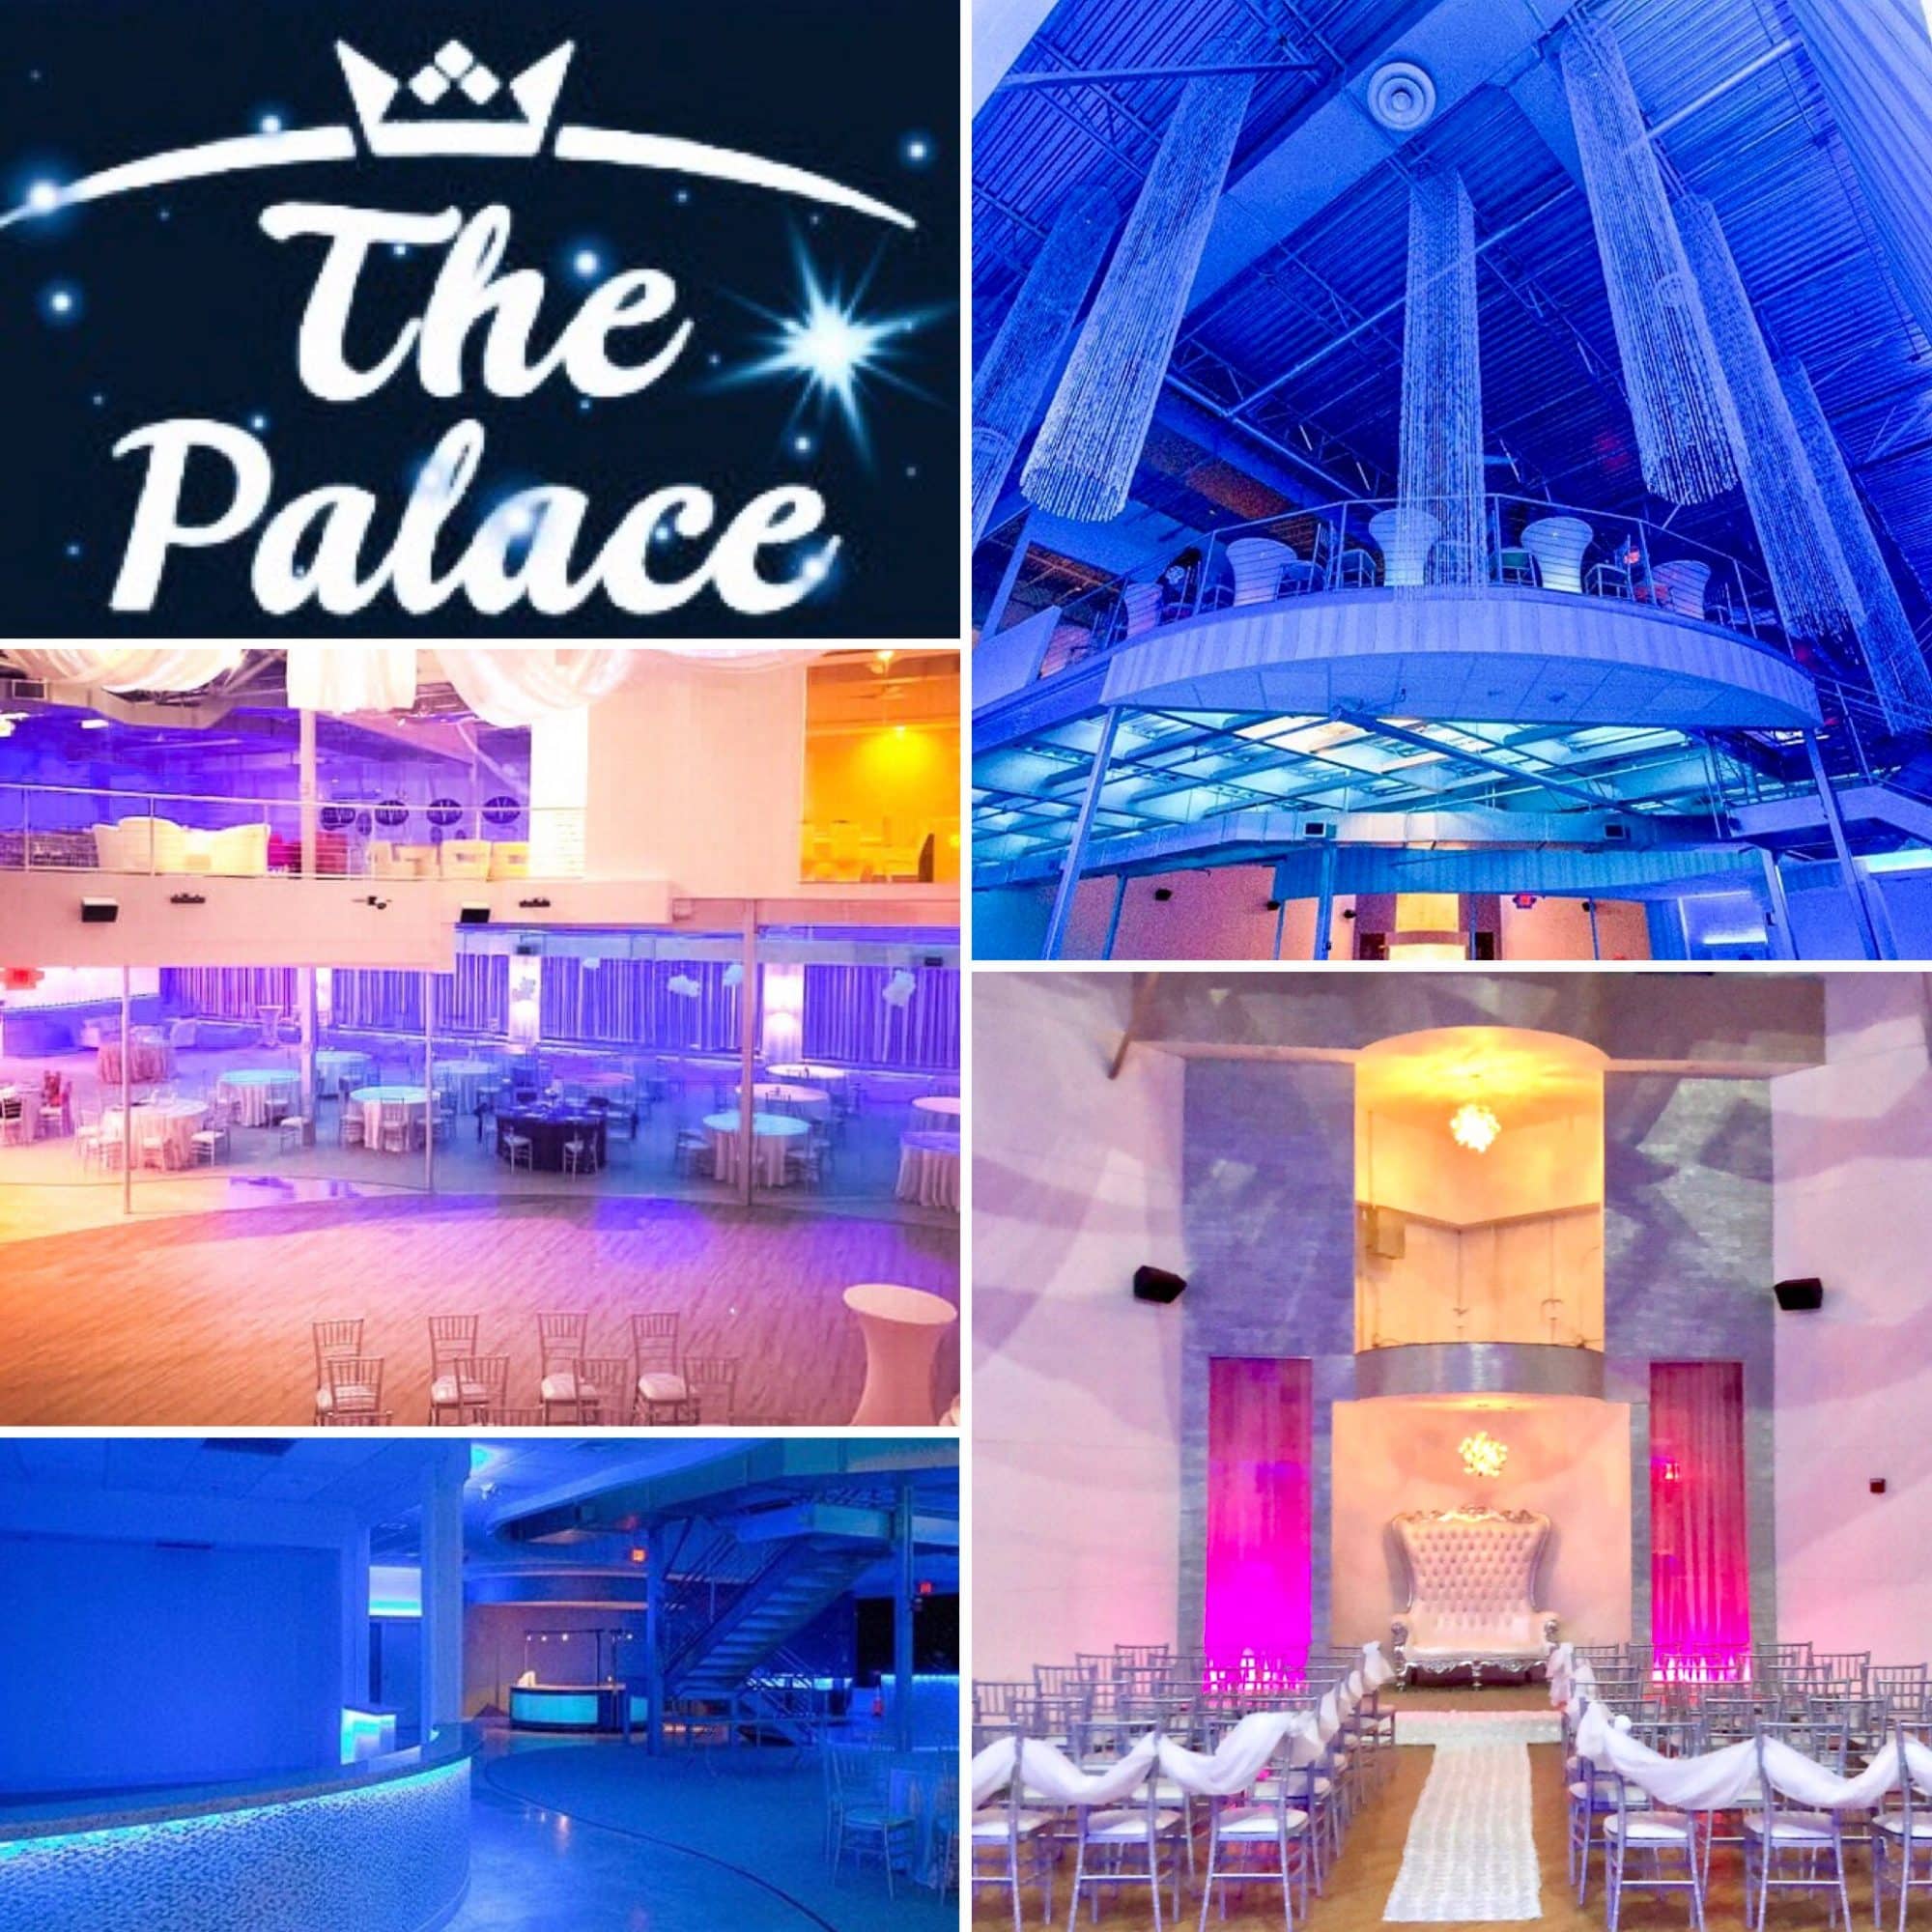 The Palace - modern, contemporary design that doesn't sacrifice elegance